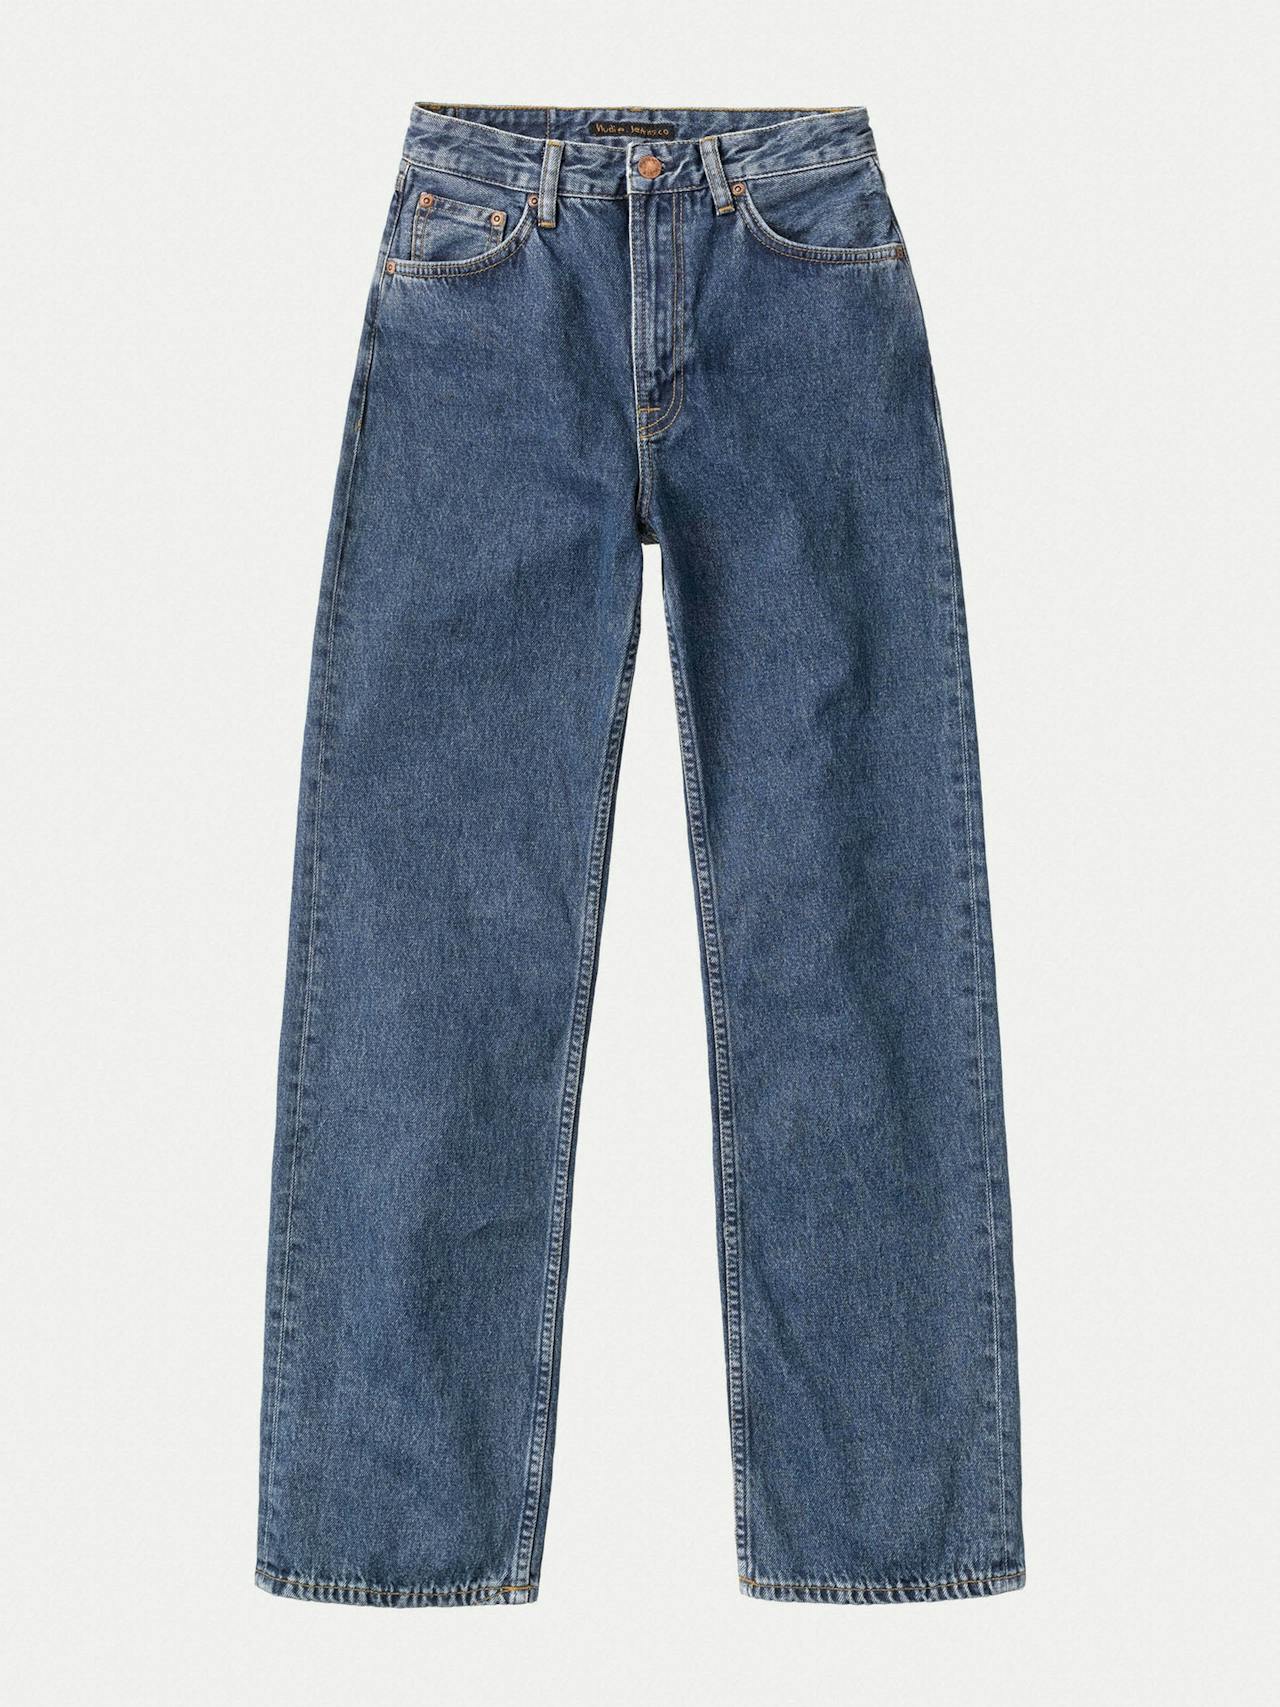 Straight leg jeans in 90s Stone